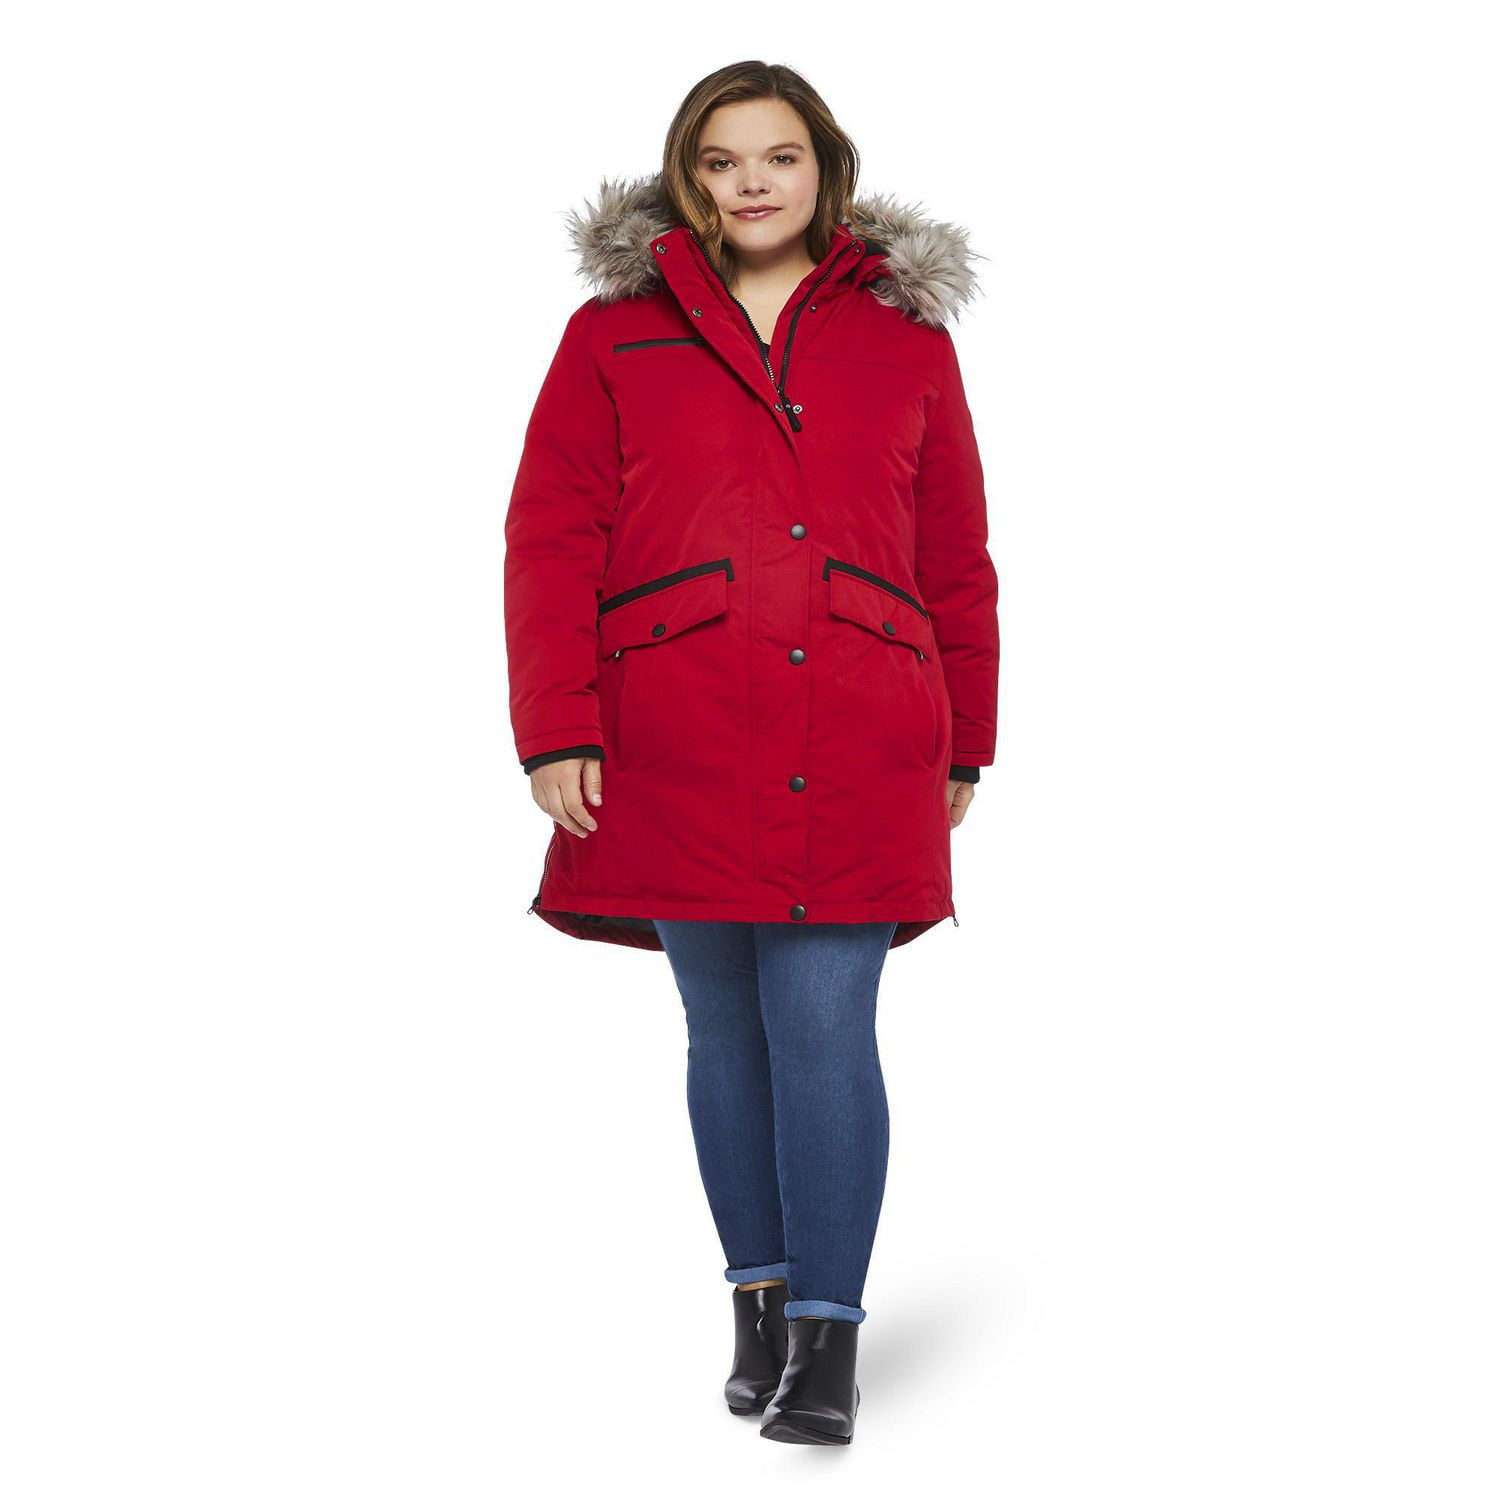  PENER Women's Winter Red Charming Thick Wool Jacket